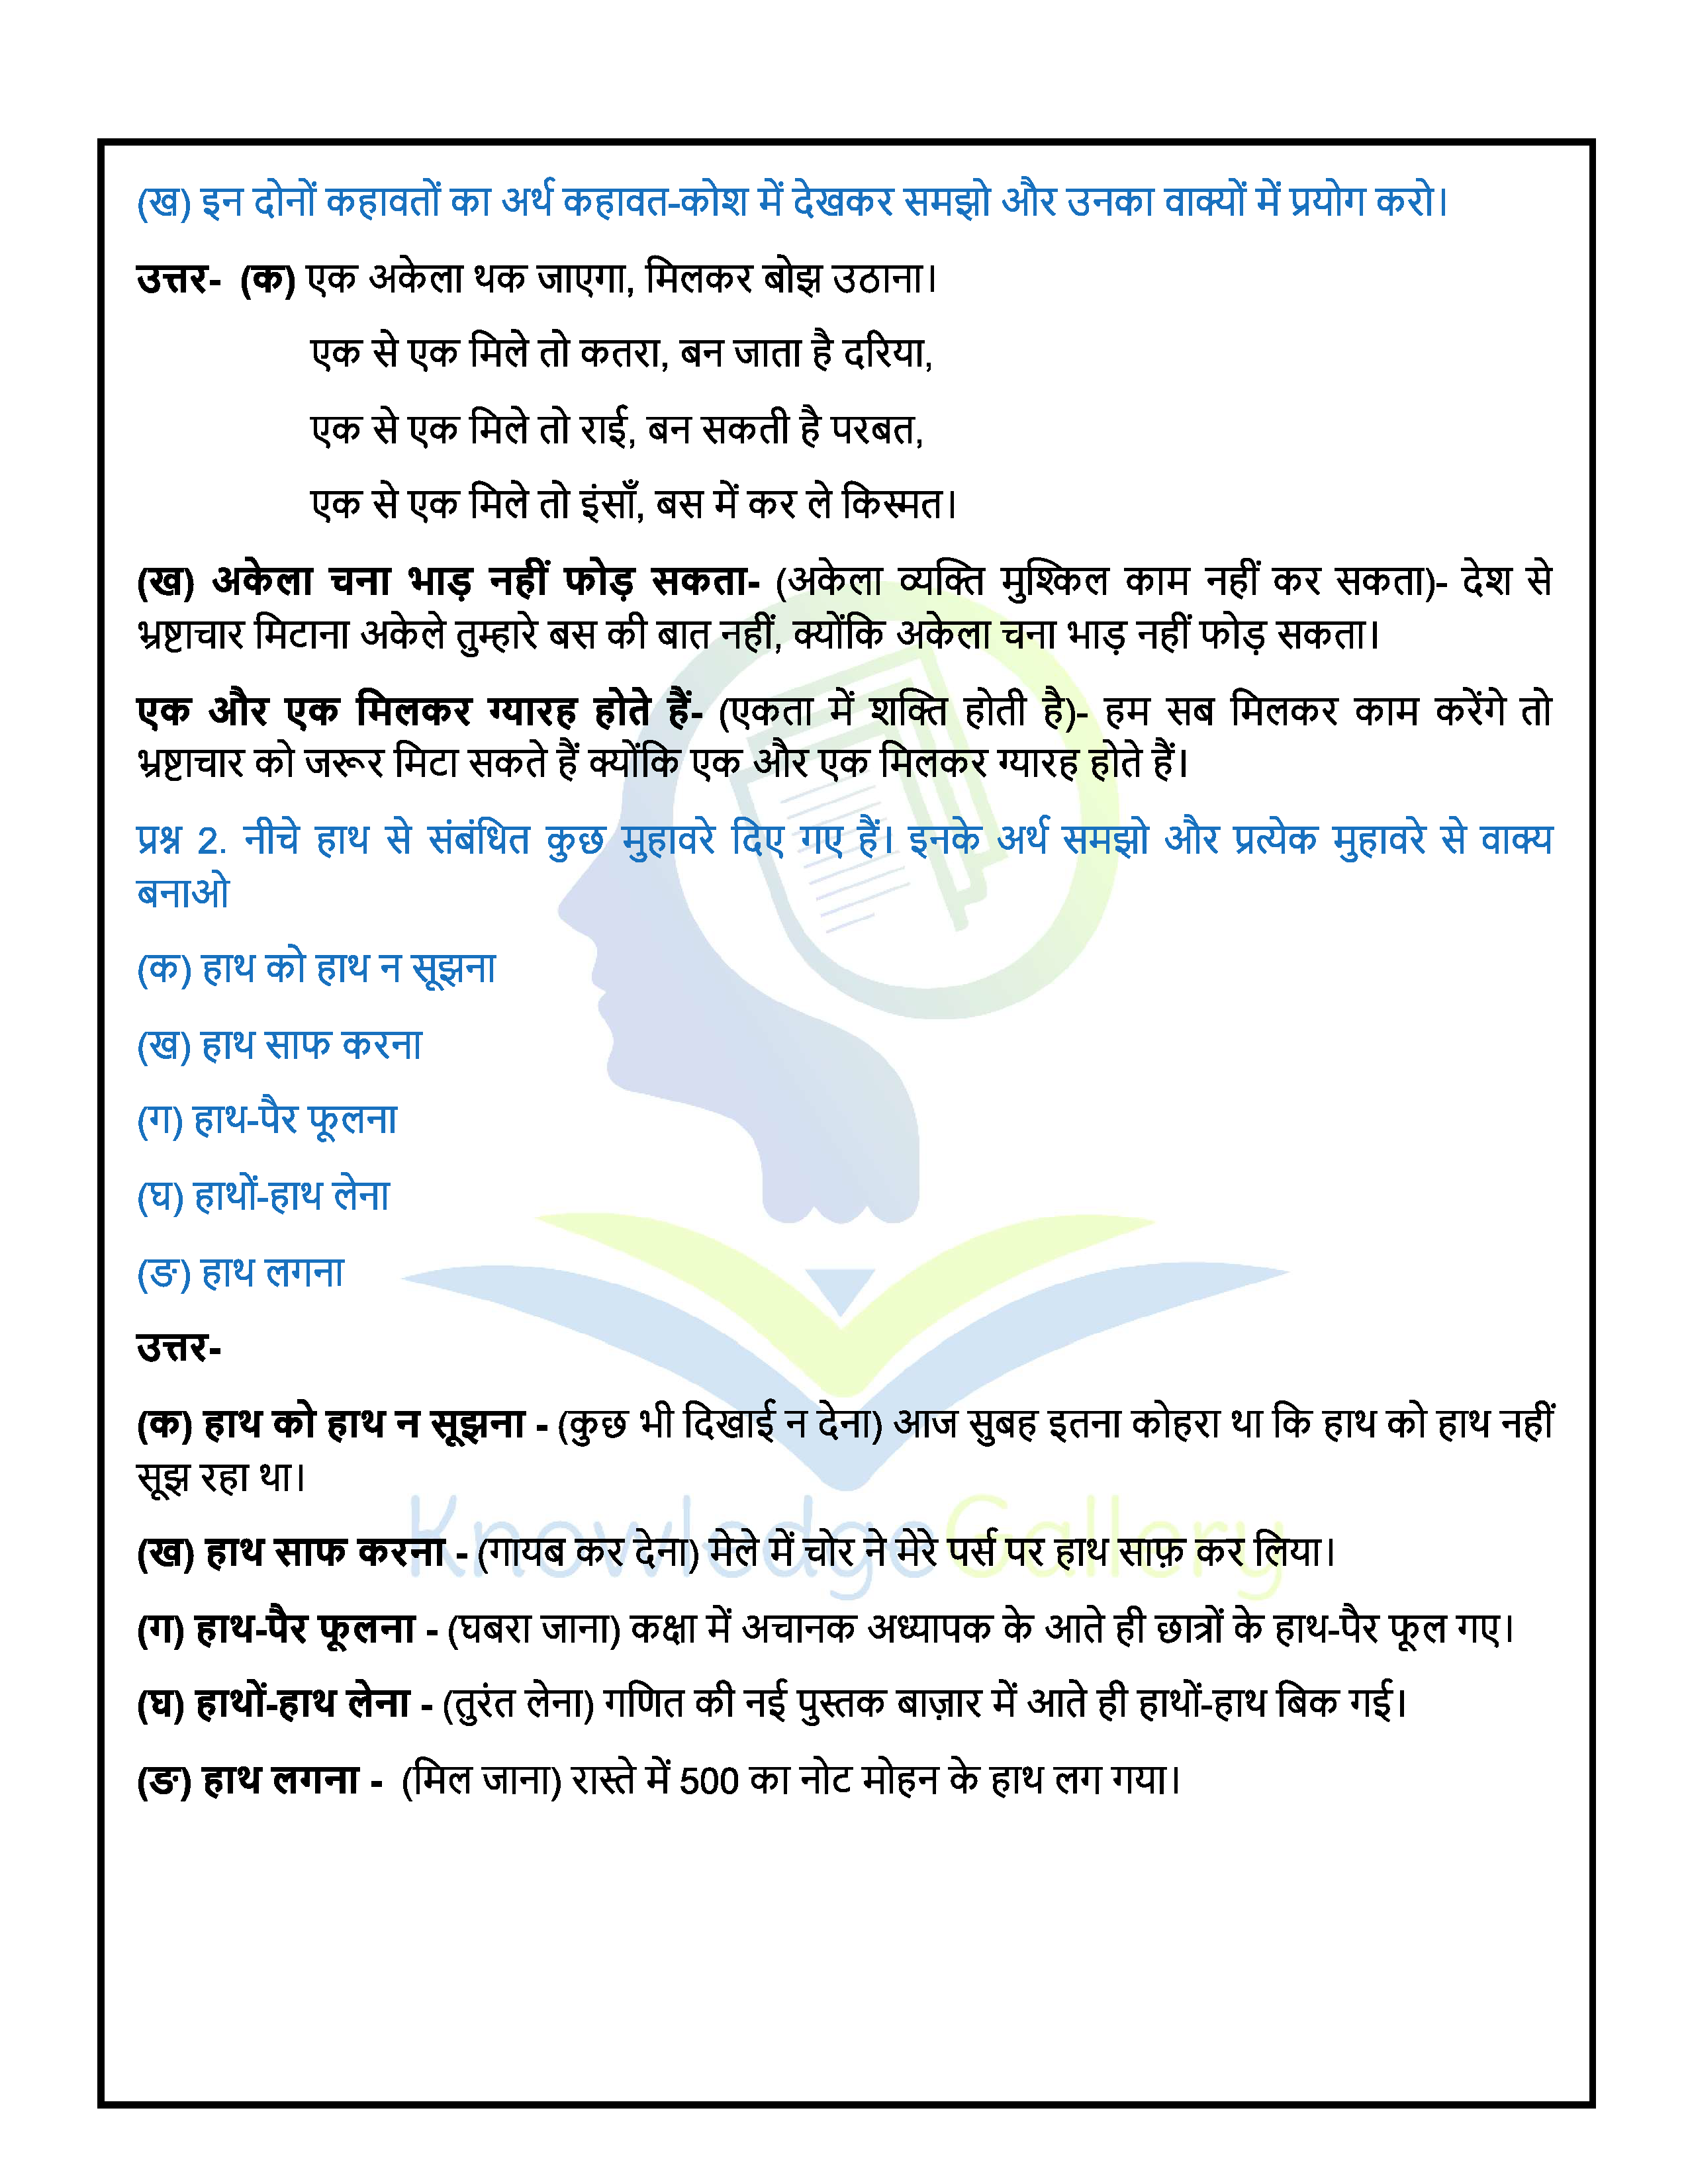 NCERT Solution For Class 6 Hindi Chapter 7 part 5